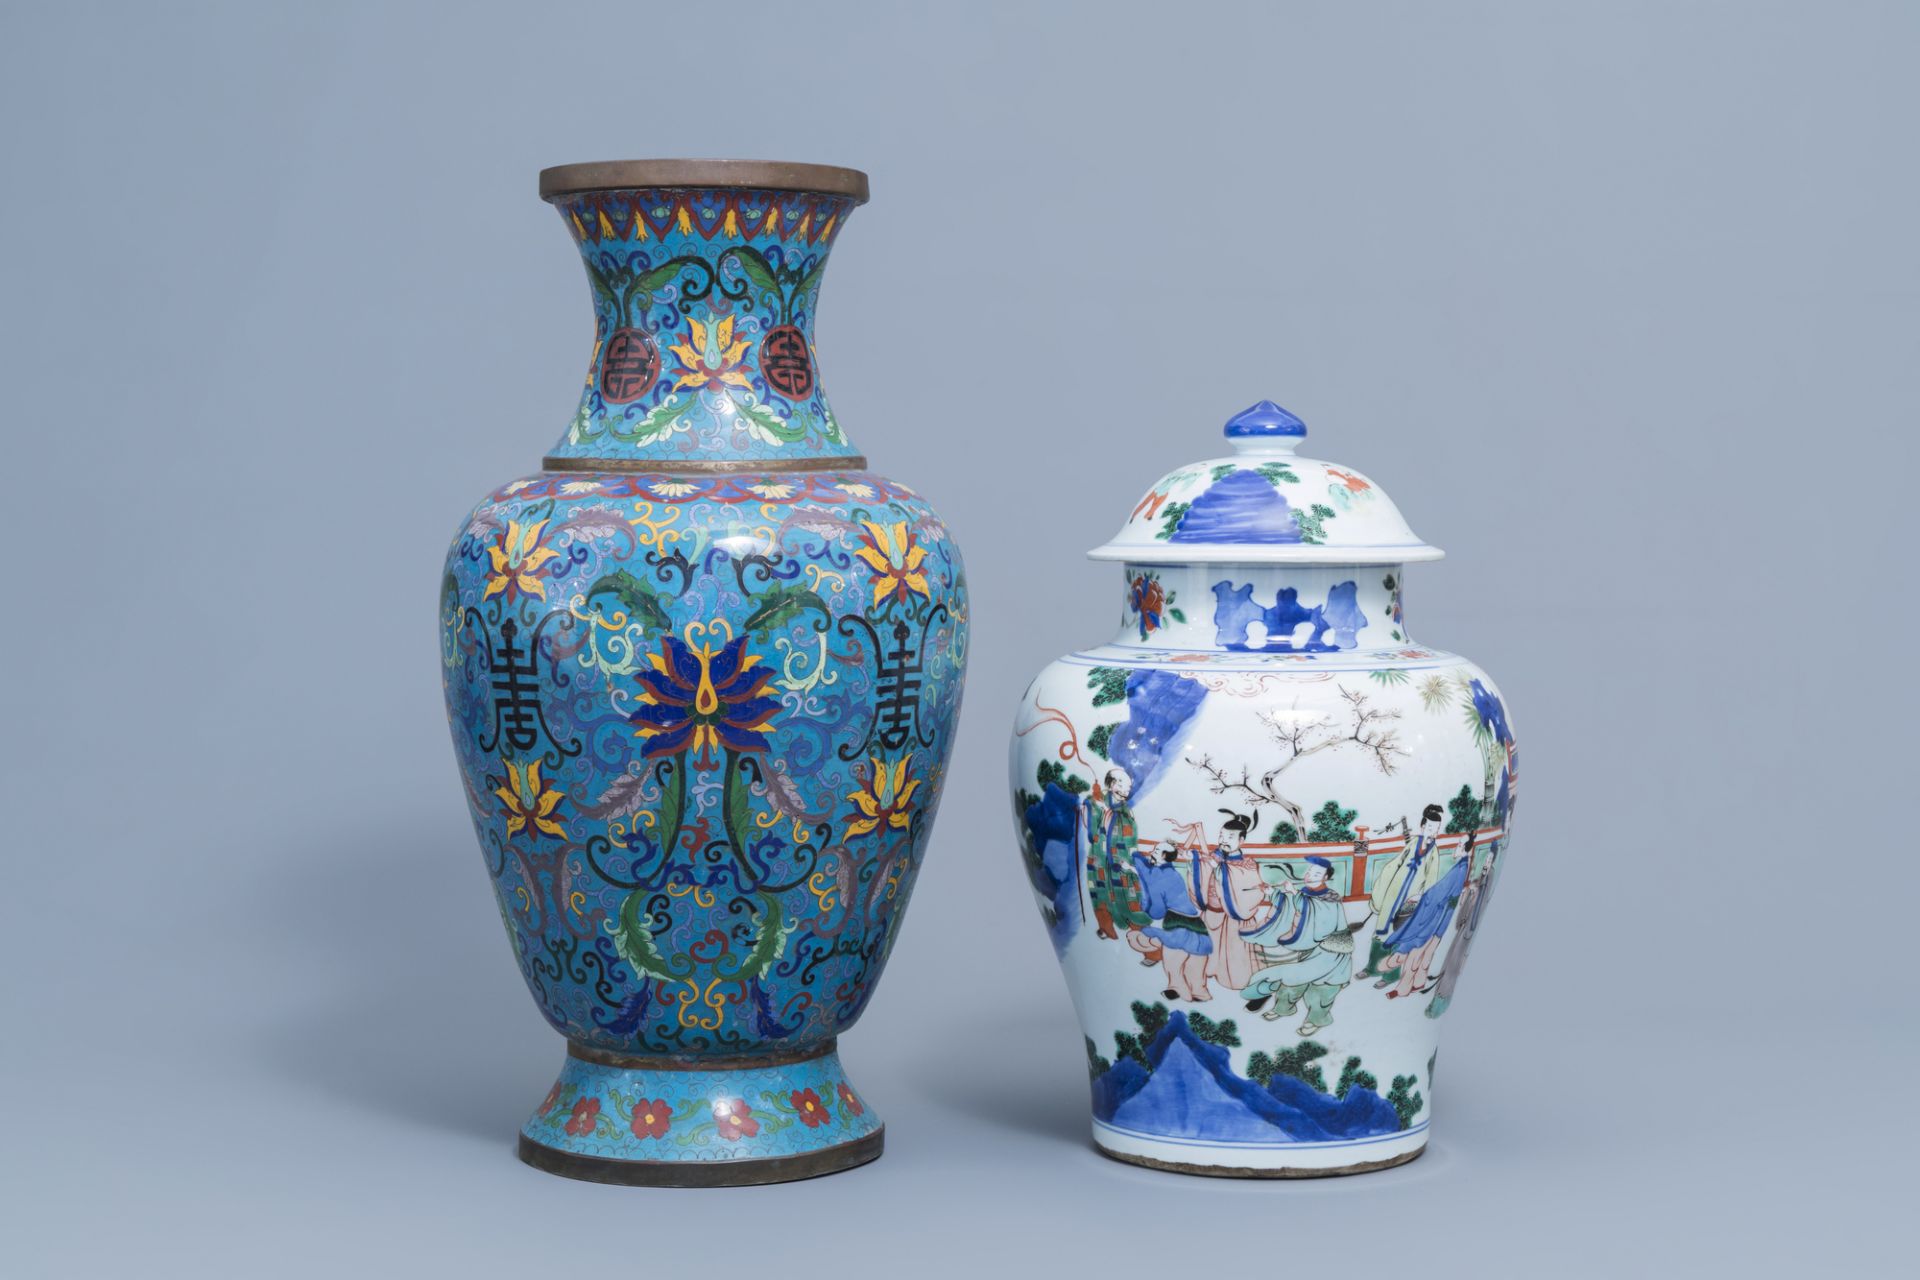 A Chinese wucai vase and cover with figurative design and a cloisonne vase with floral design, 19th/